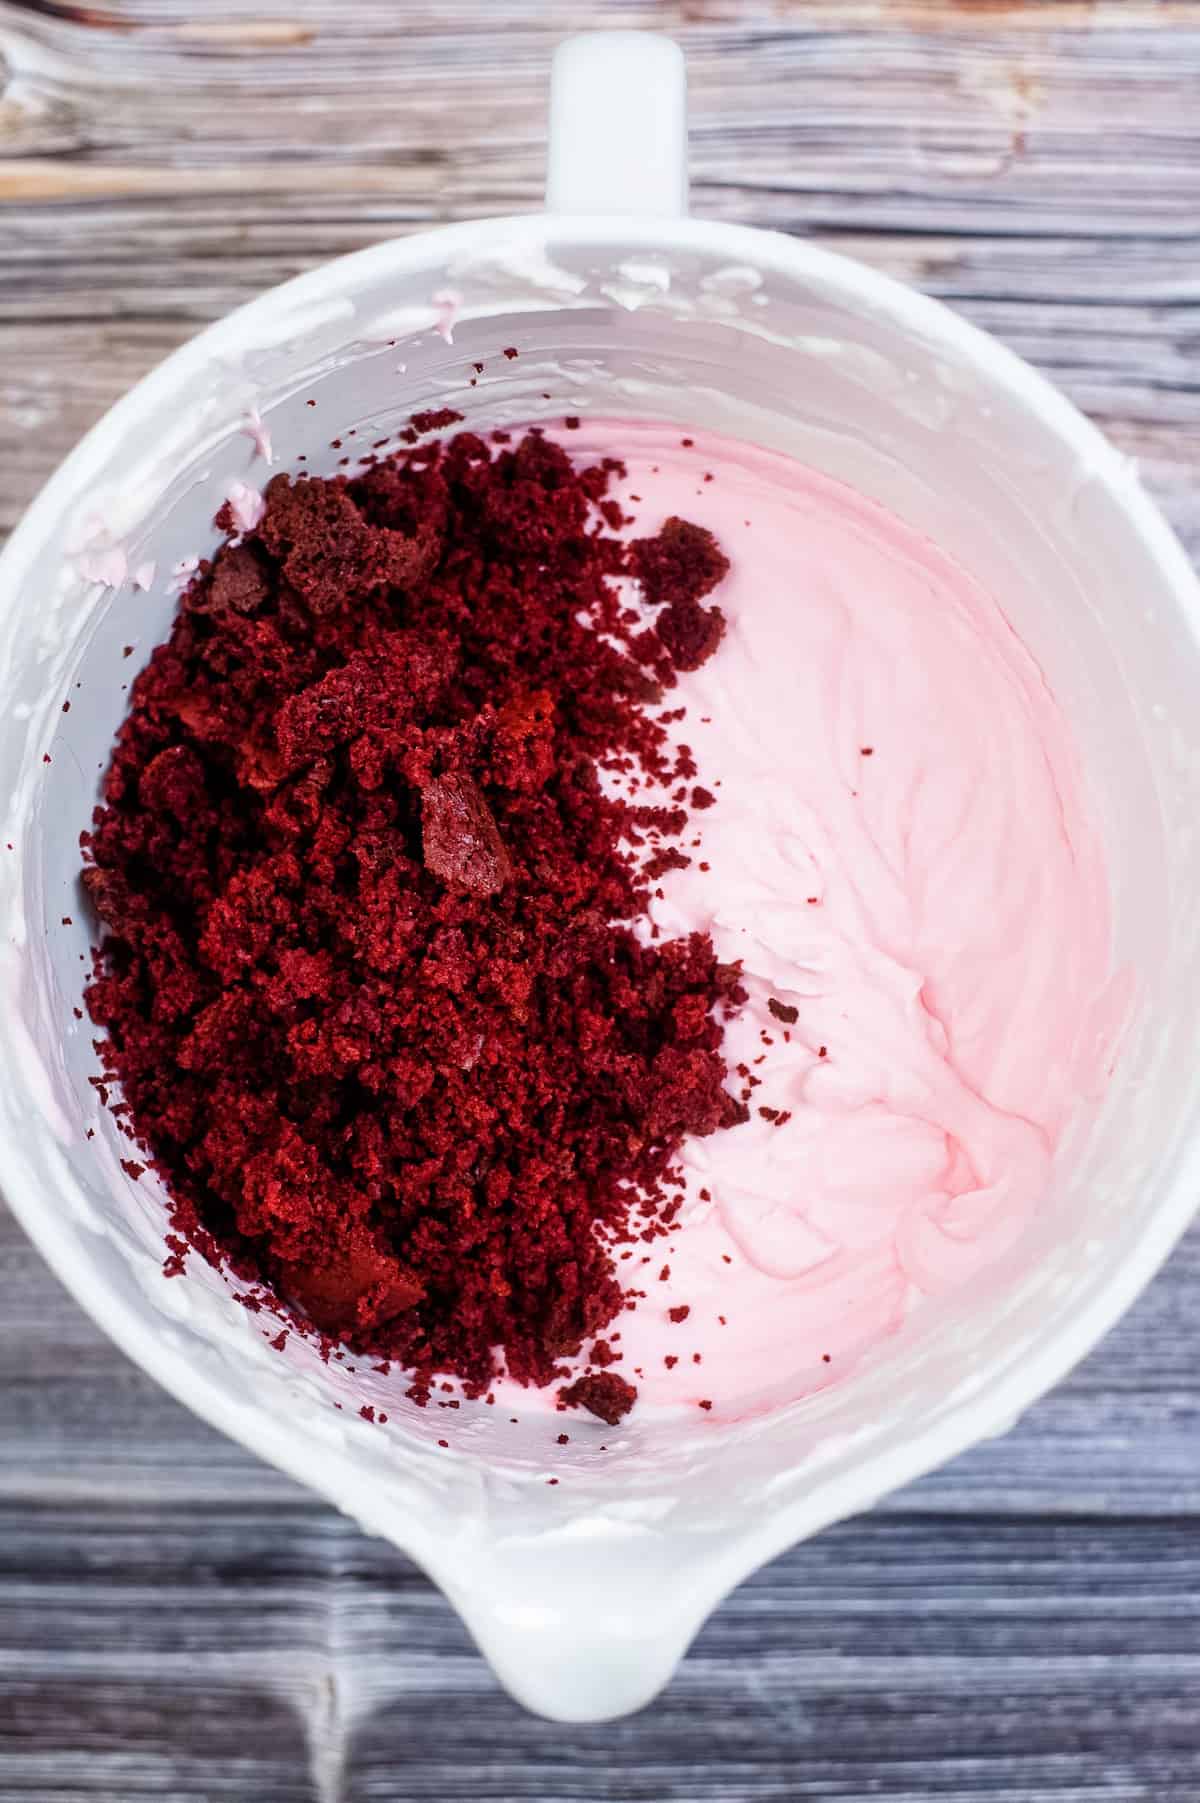 add crumbled red velvet cake to the ice cream